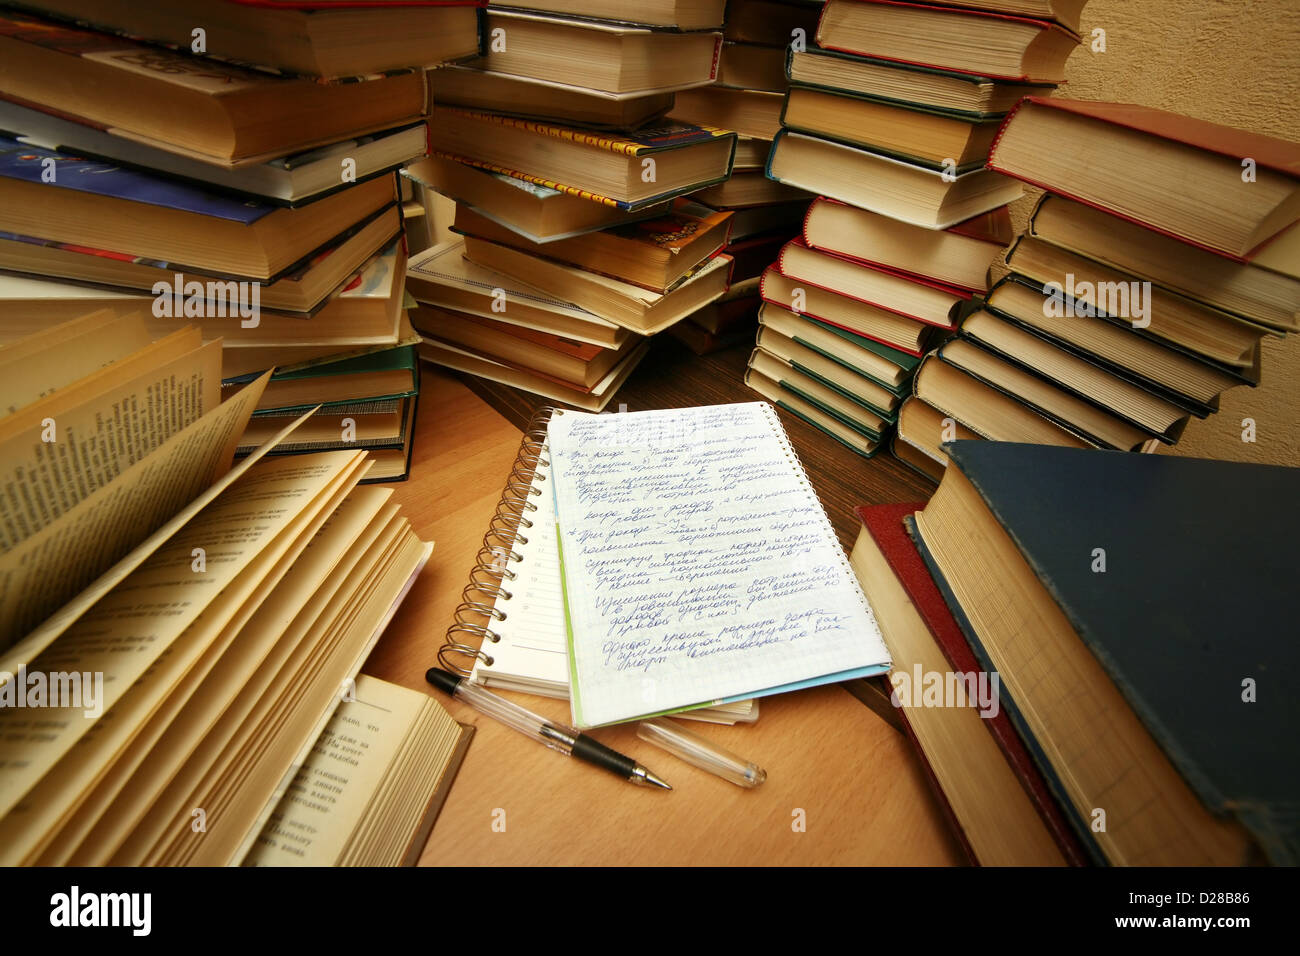 Many old books combined by a heap. Russian saying 'Knowledge - light, ignorance - darkness' Stock Photo